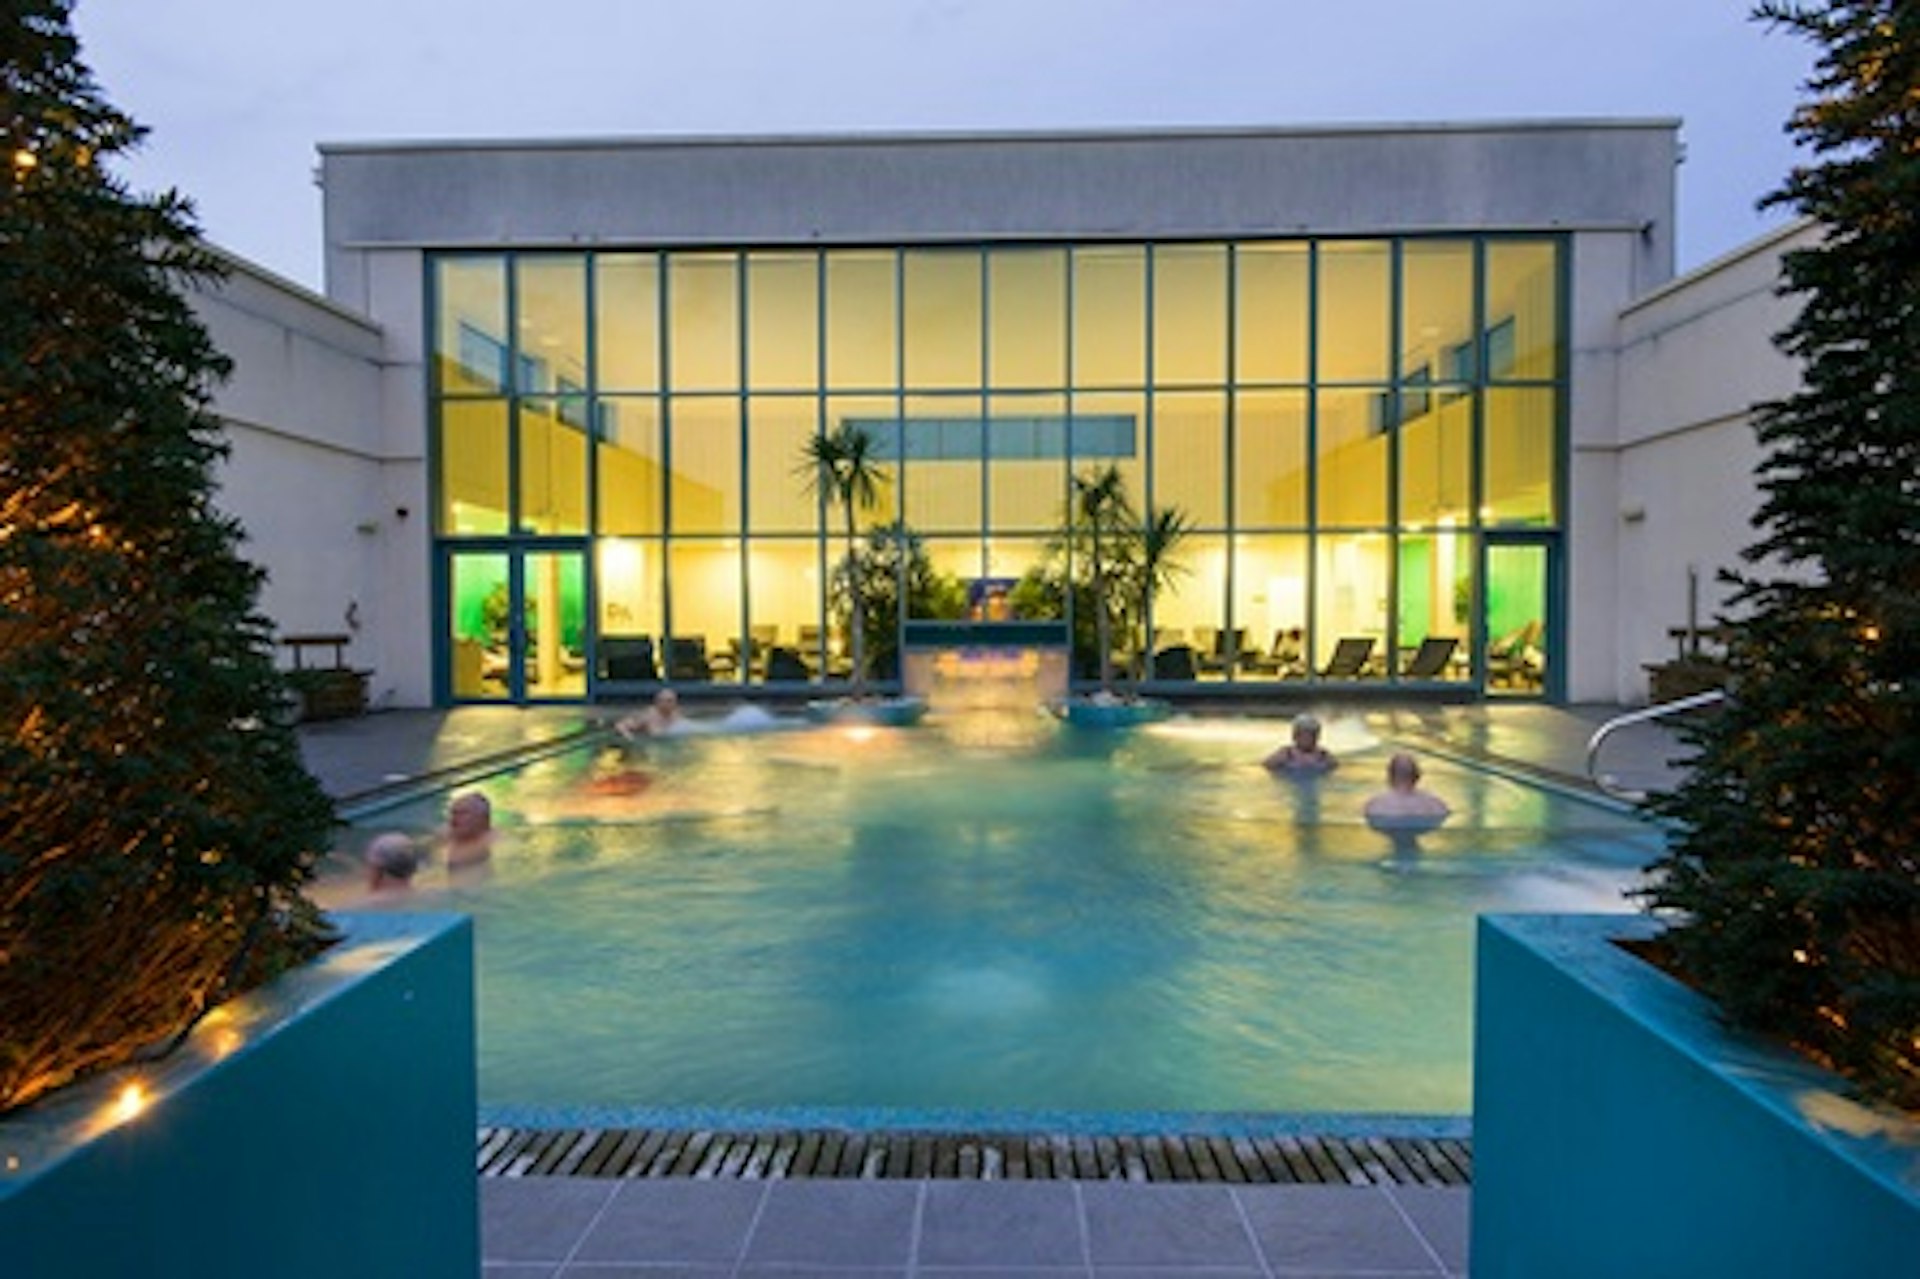 Deluxe Two Night Spa Break with Two Treatments and Dinner for Two at The Malvern Spa 1